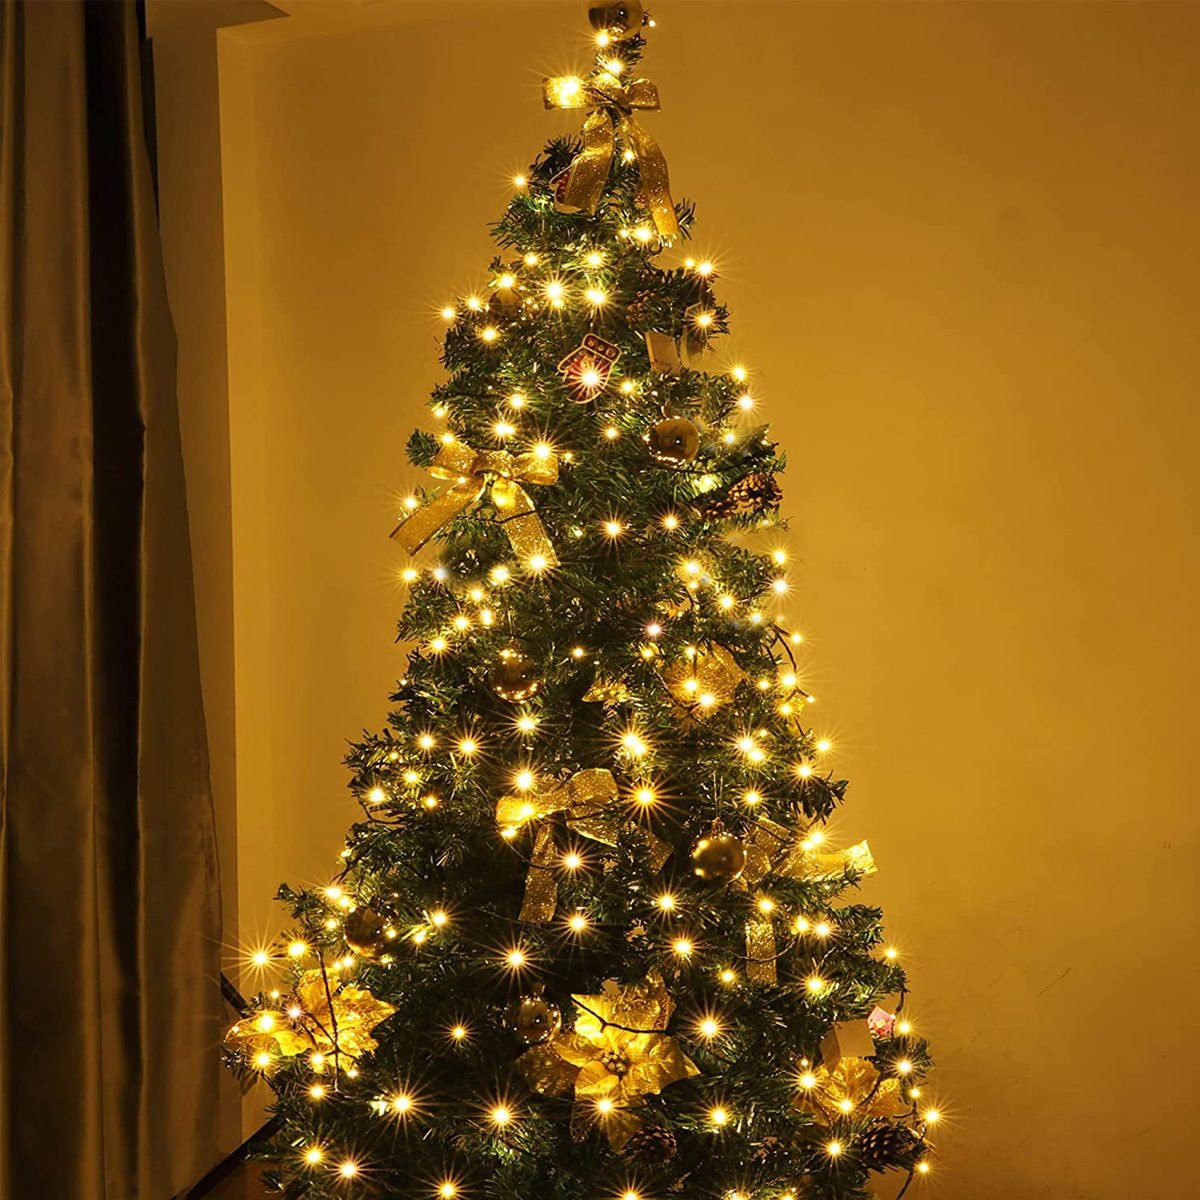 The Best Christmas Tree Lights, Including LED Tree Lights, of 2022